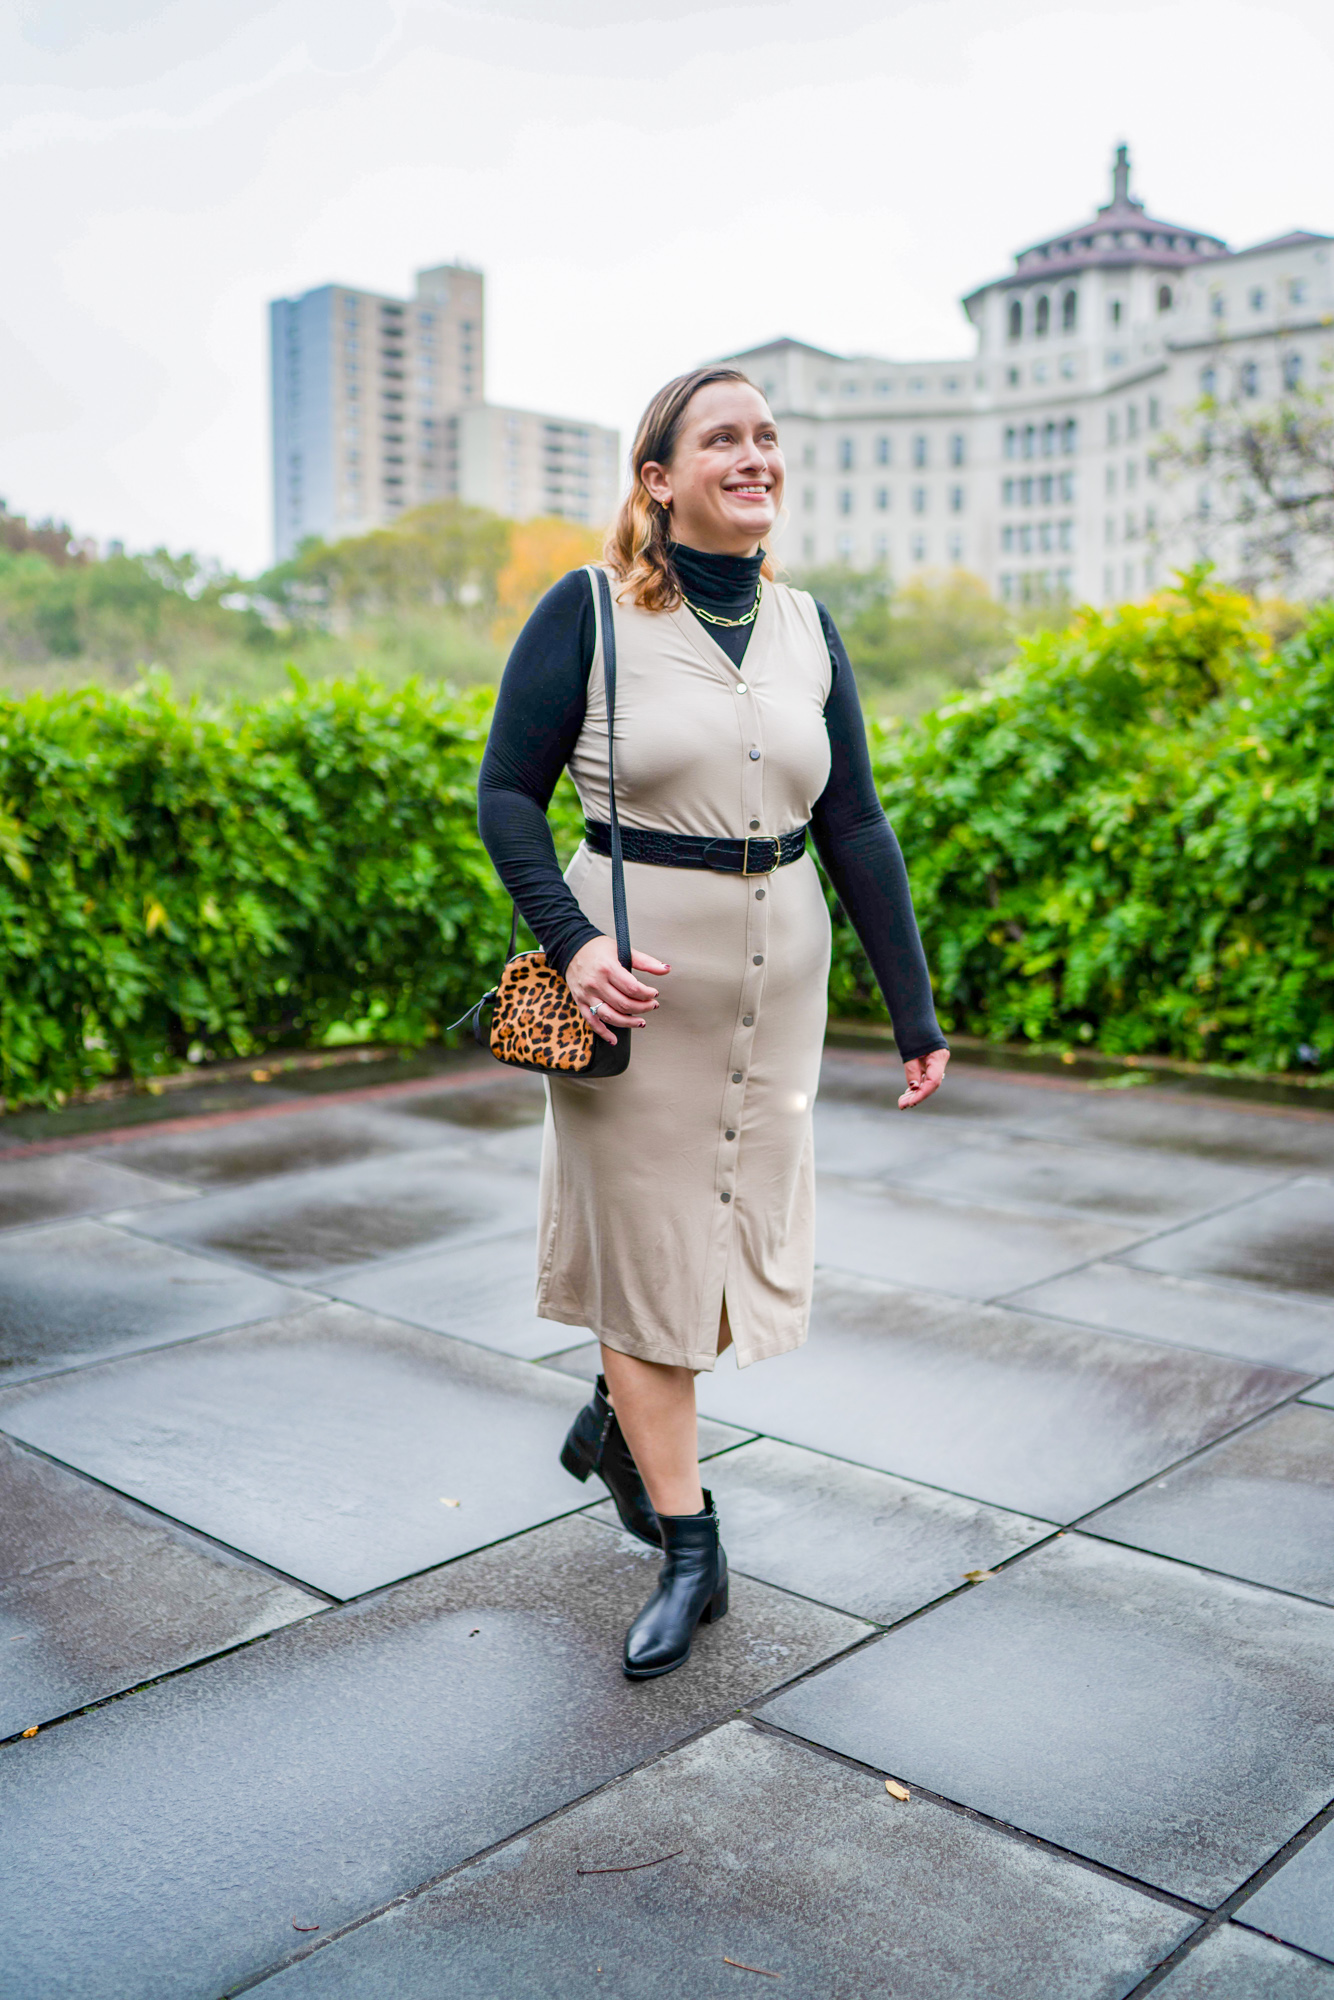 How to style a sleeveless dress for fall